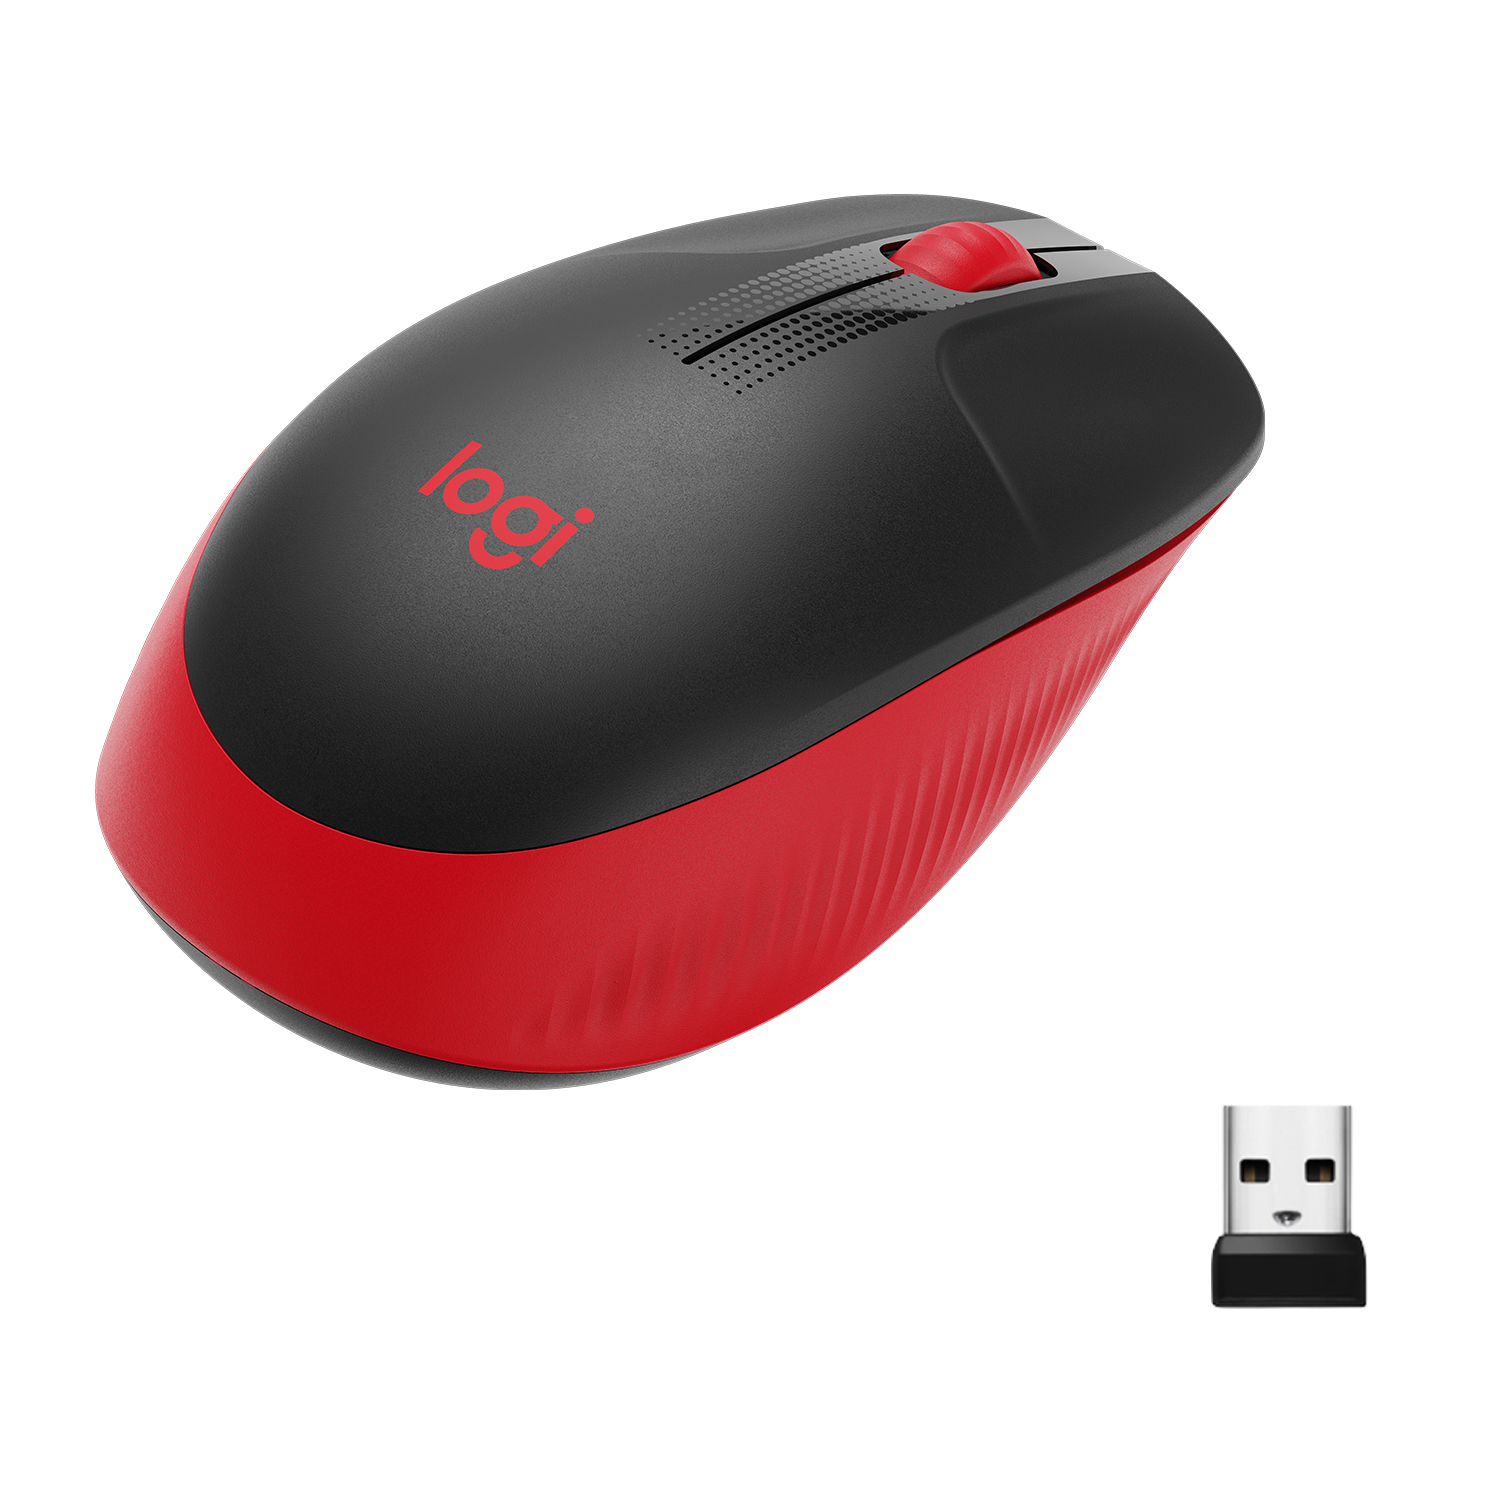 M190 Full-size wireless mouse - RED - EMEA